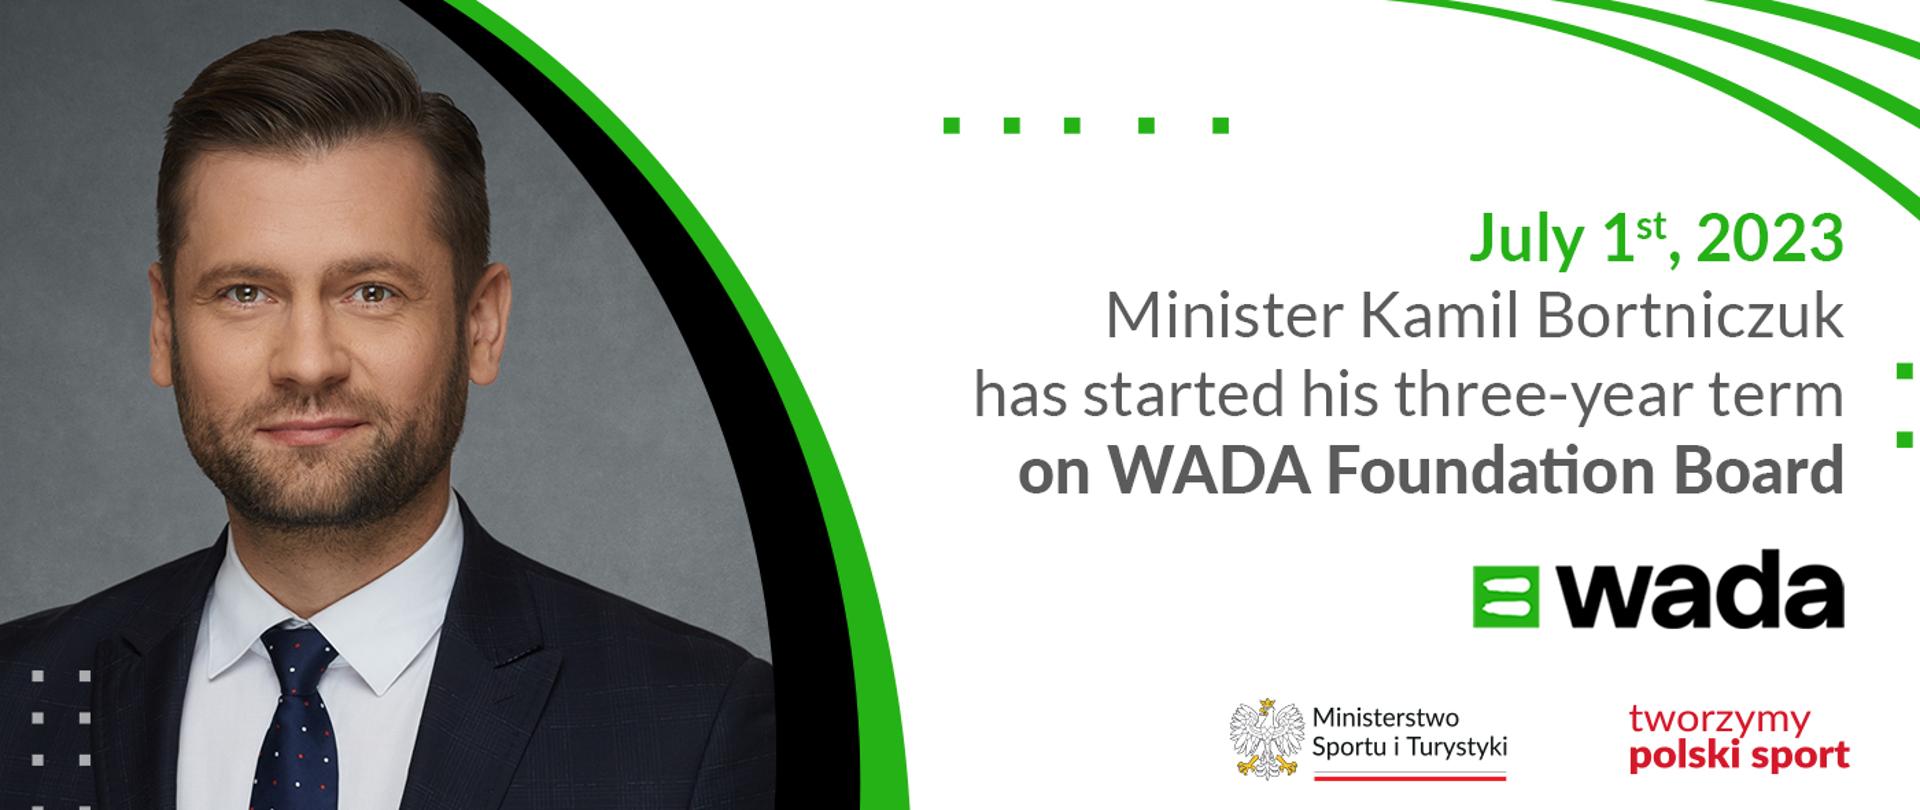 Portrait photo of Minister Kamil Bortniczuk plus info that he has started his three-year term on WADA Foundation Board on July 1st, 2023